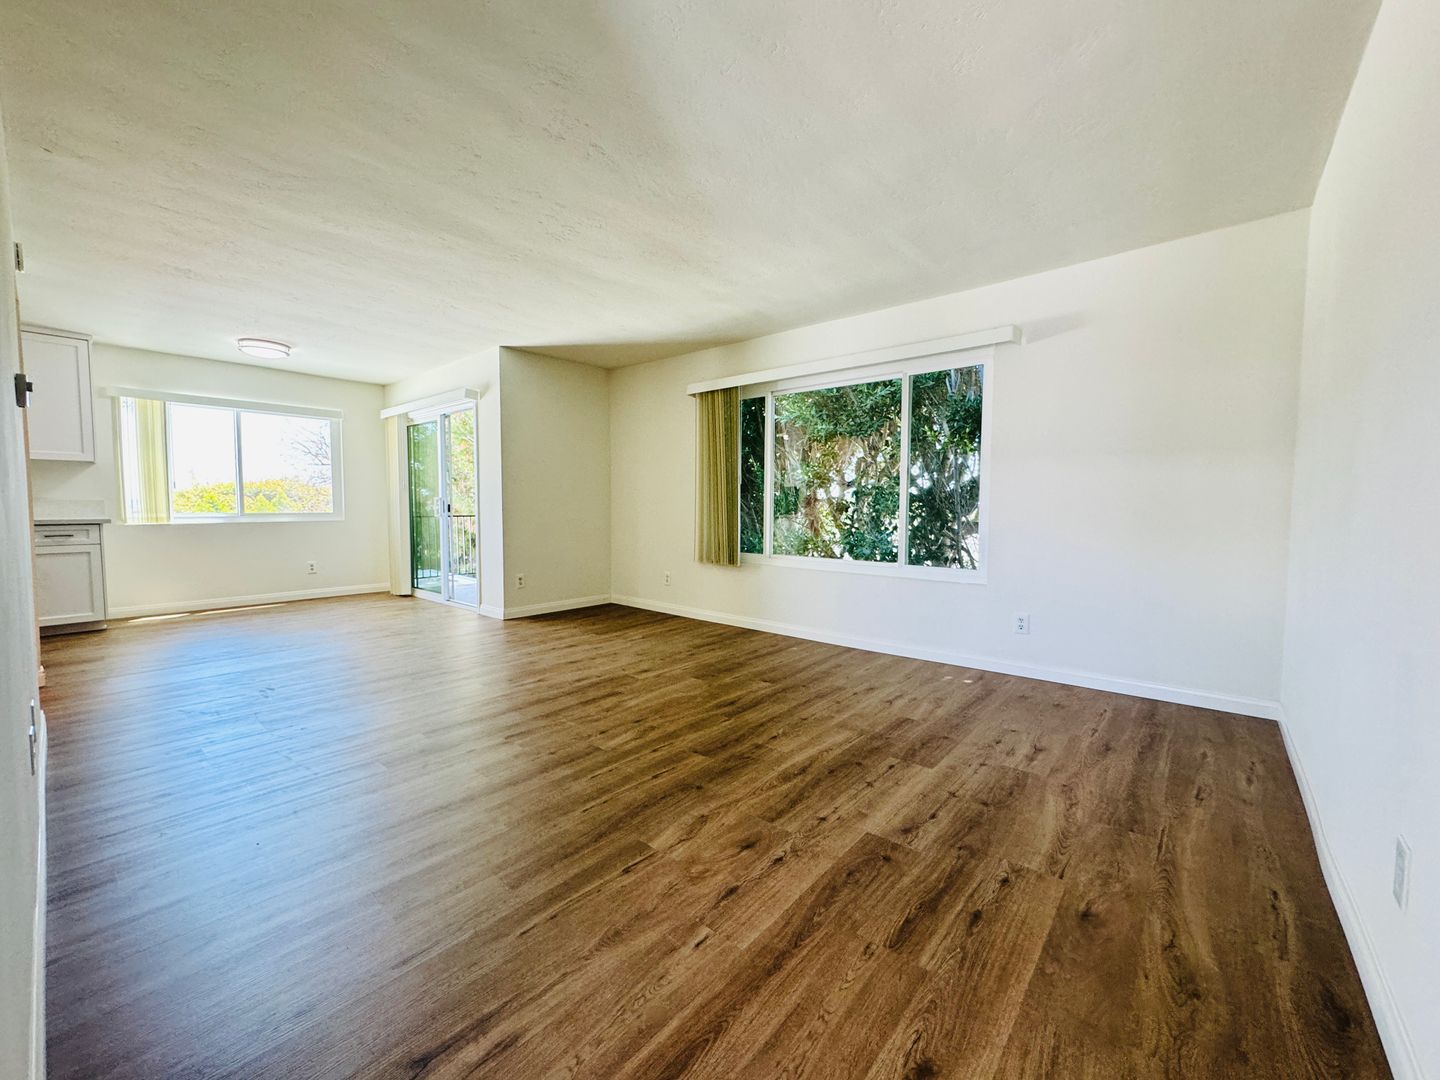 Newly Renovated Pacific Beach Condo 2BD/1BA Available Now!